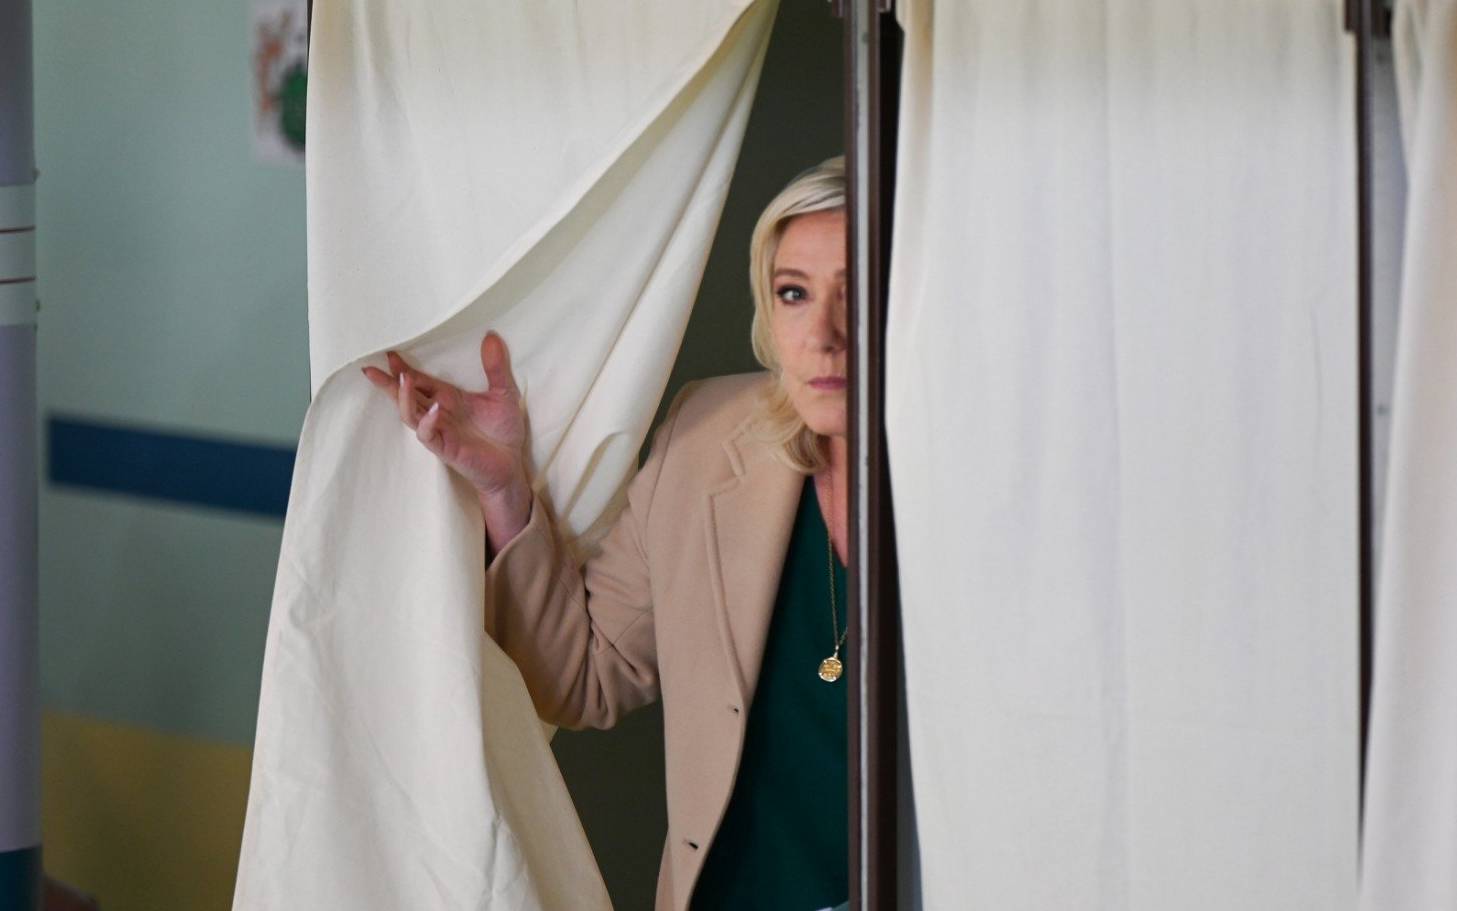 French far-right party Rassemblement National (RN) presidential candidate Marine Le Pen leaves the polling booth as she votes during the first round of France's presidential election at a polling station in Henin-Beaumont, northern France on April 10, 2022. (Photo by Denis Charlet / AFP)